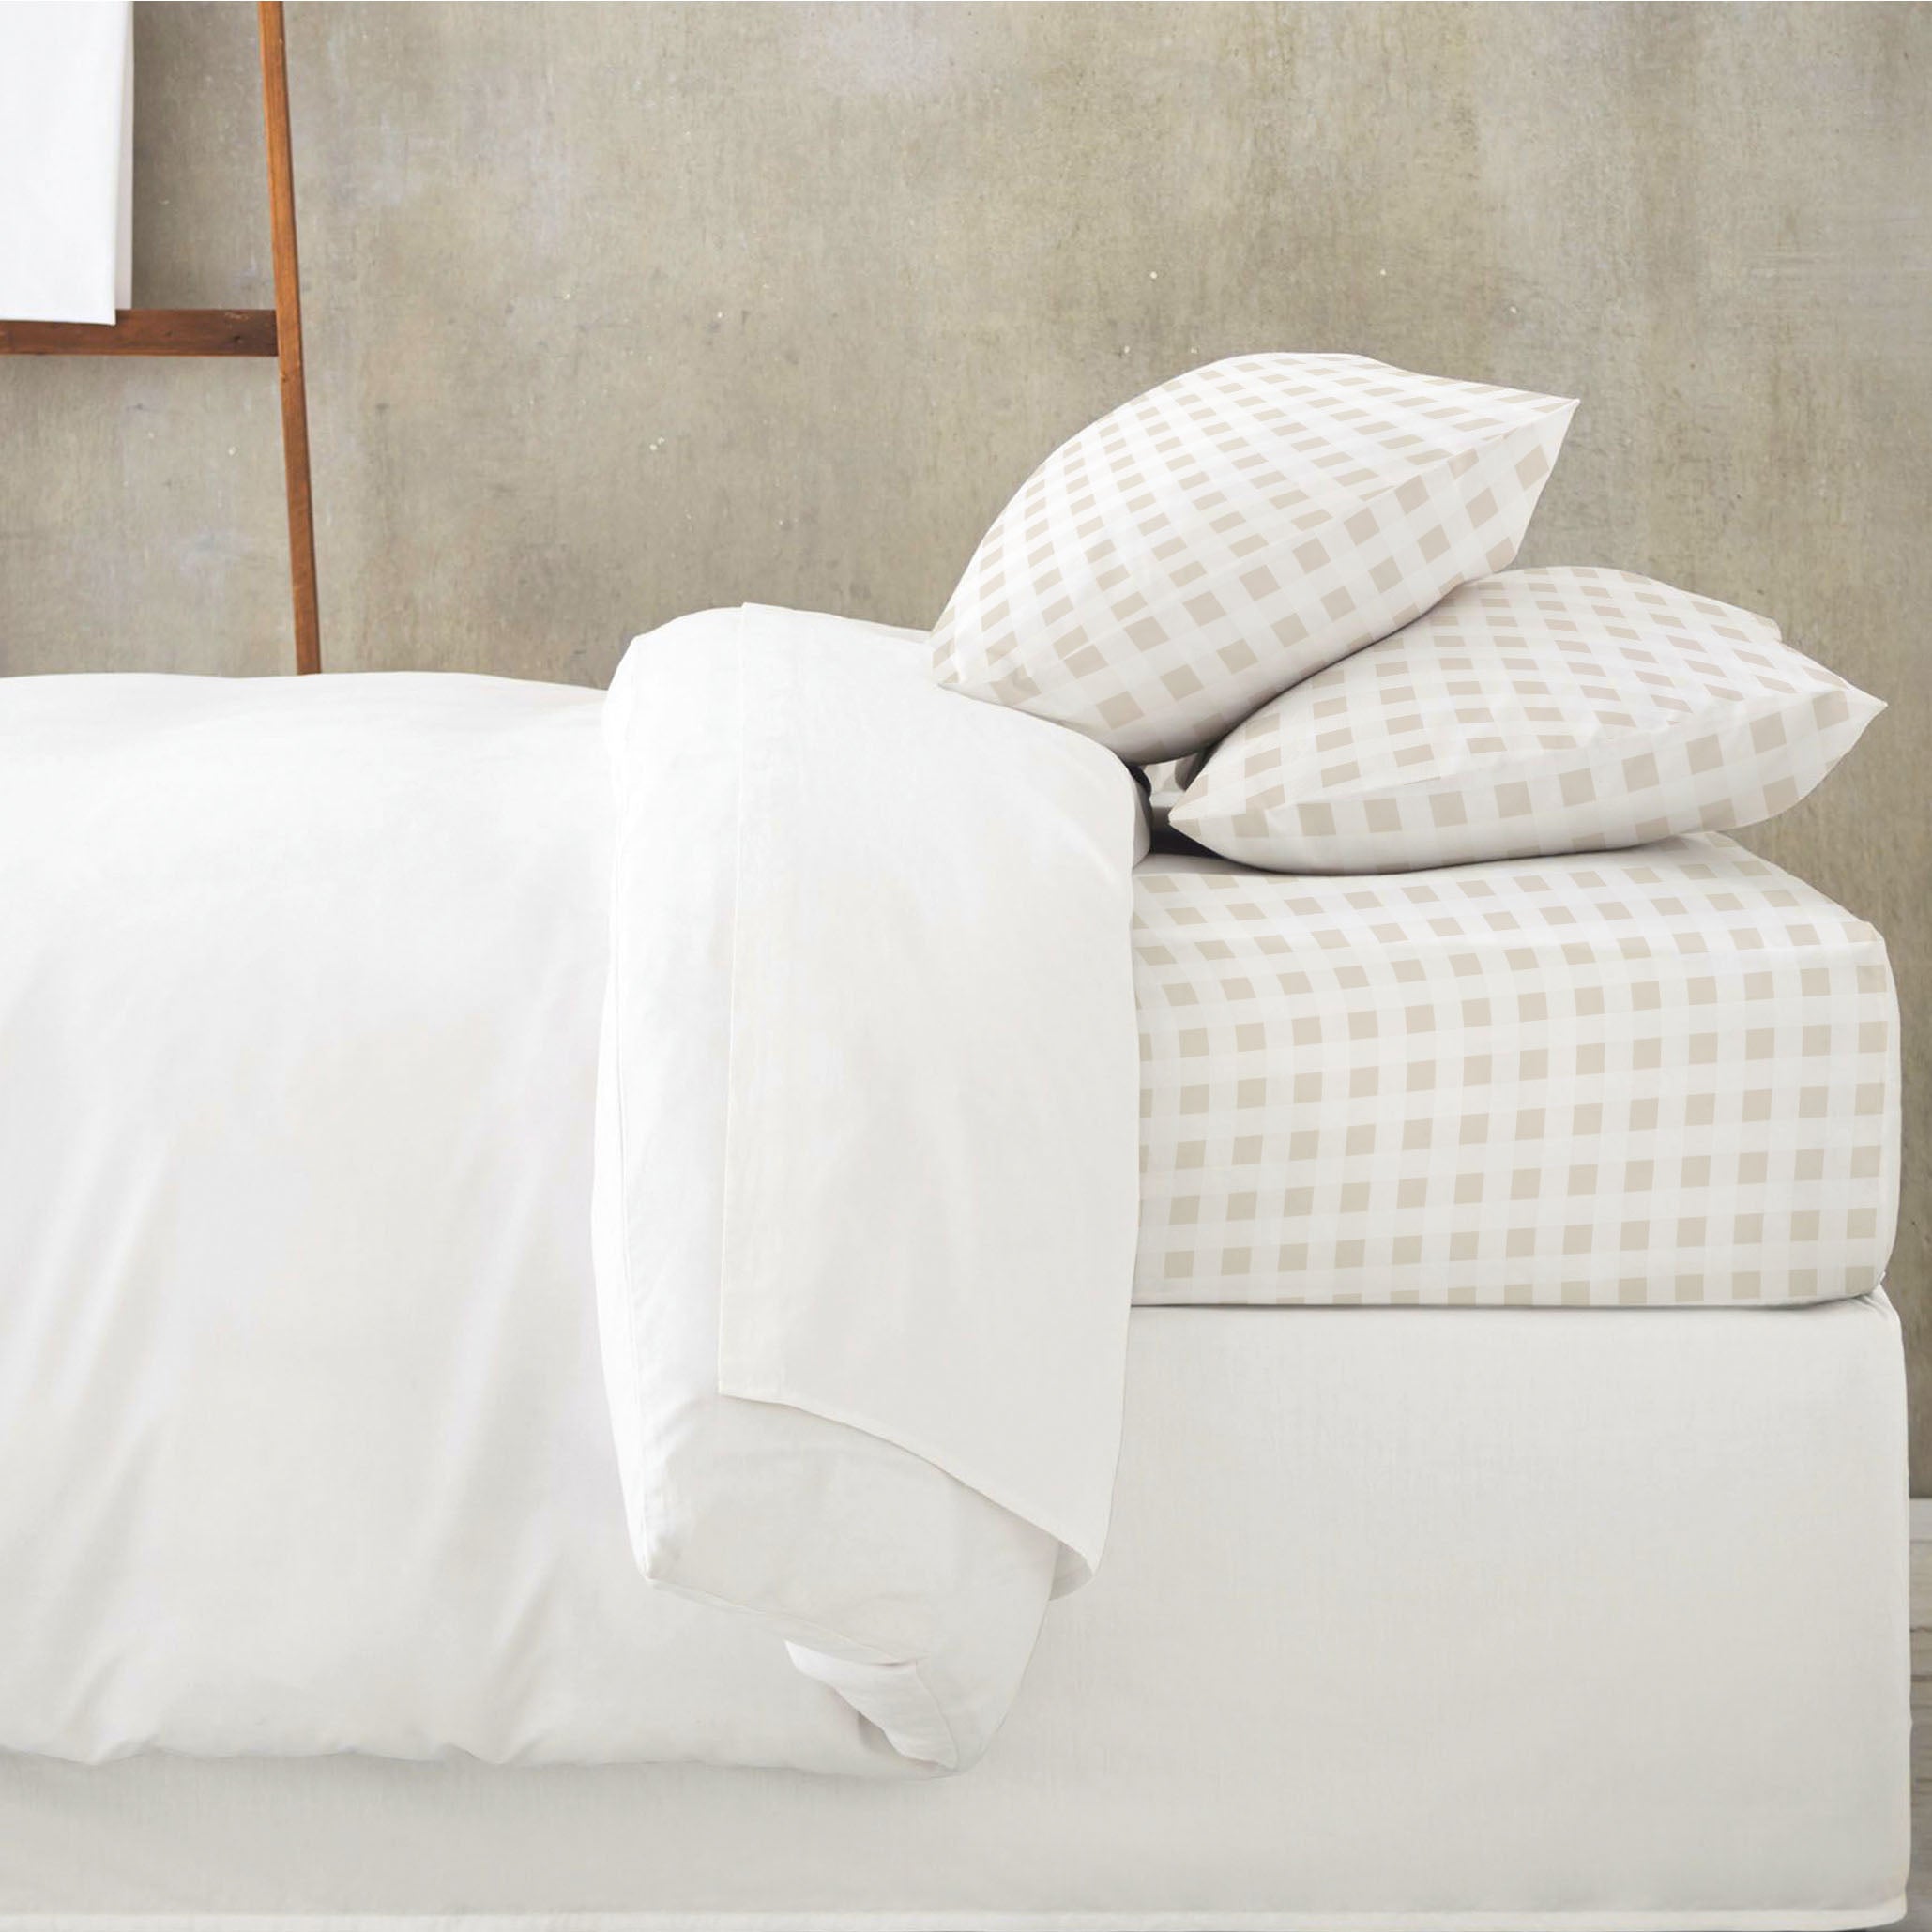 A neatly made bed with white and checkered beige bedding, including an Organic Cotton Fitted Sheet Set - Plaid and four pillows, set against a textured grey wall from Makemake Organics.